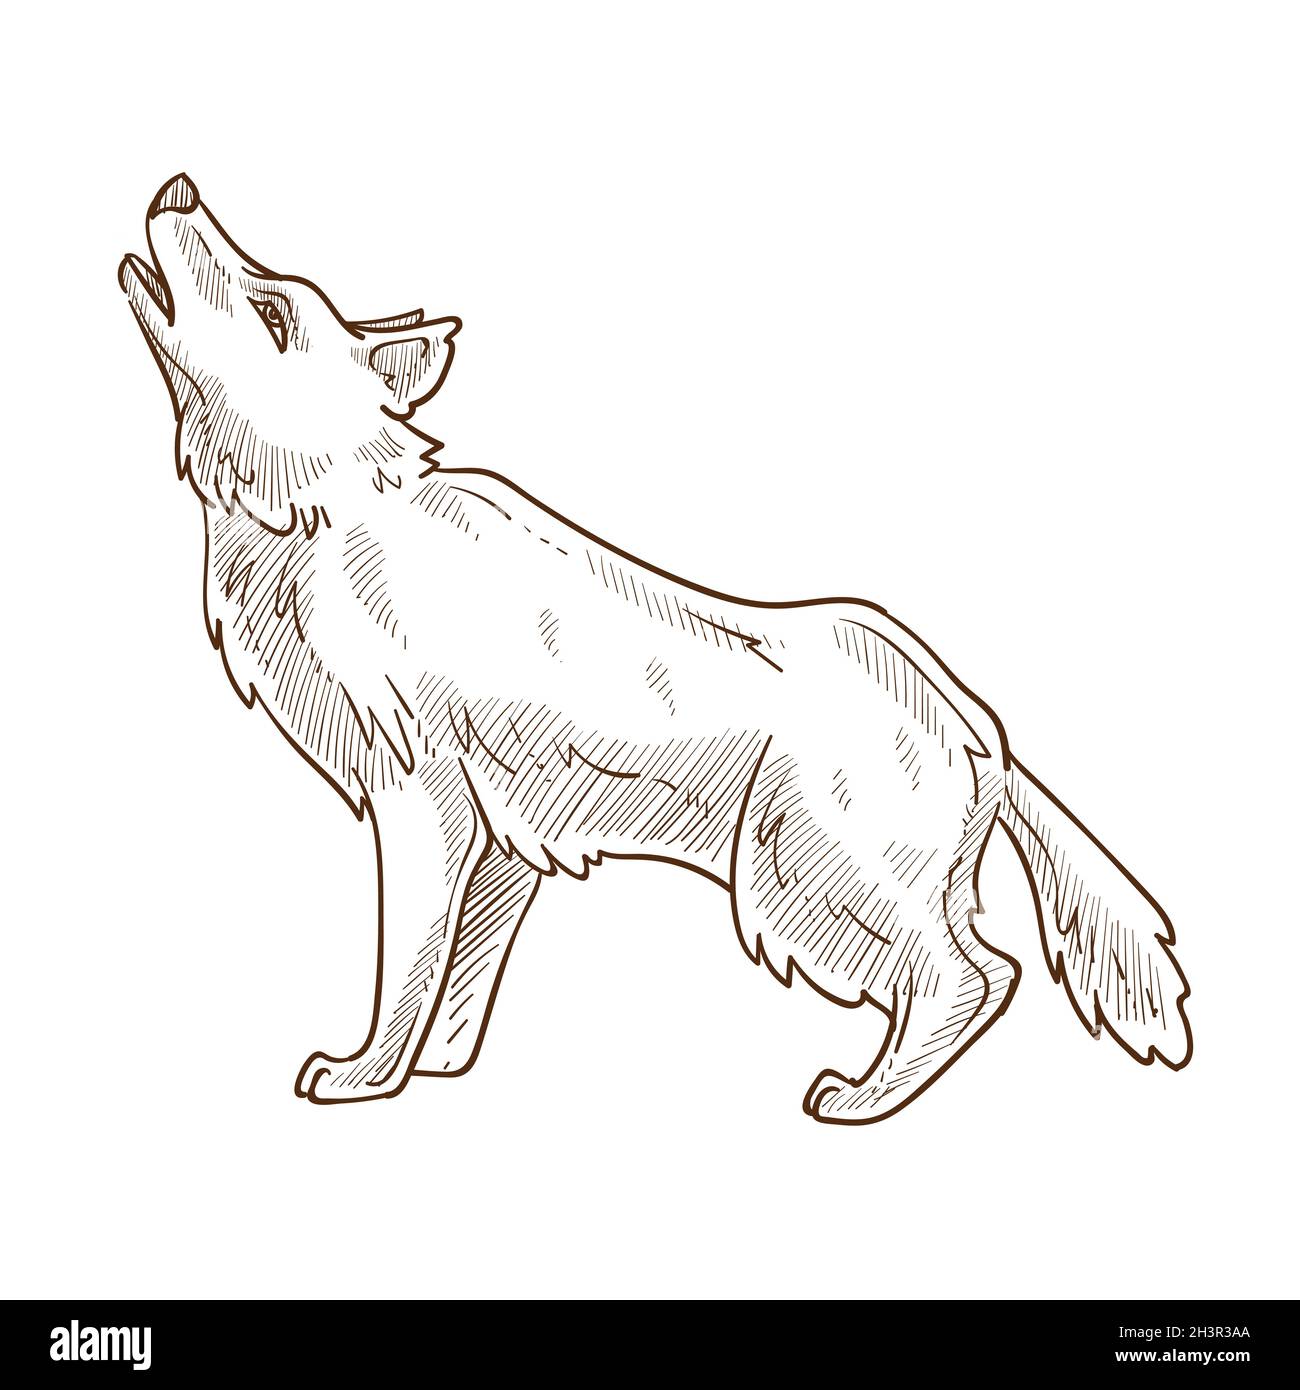 Wild animal, wolf howling at moon isolated sketch Stock Vector